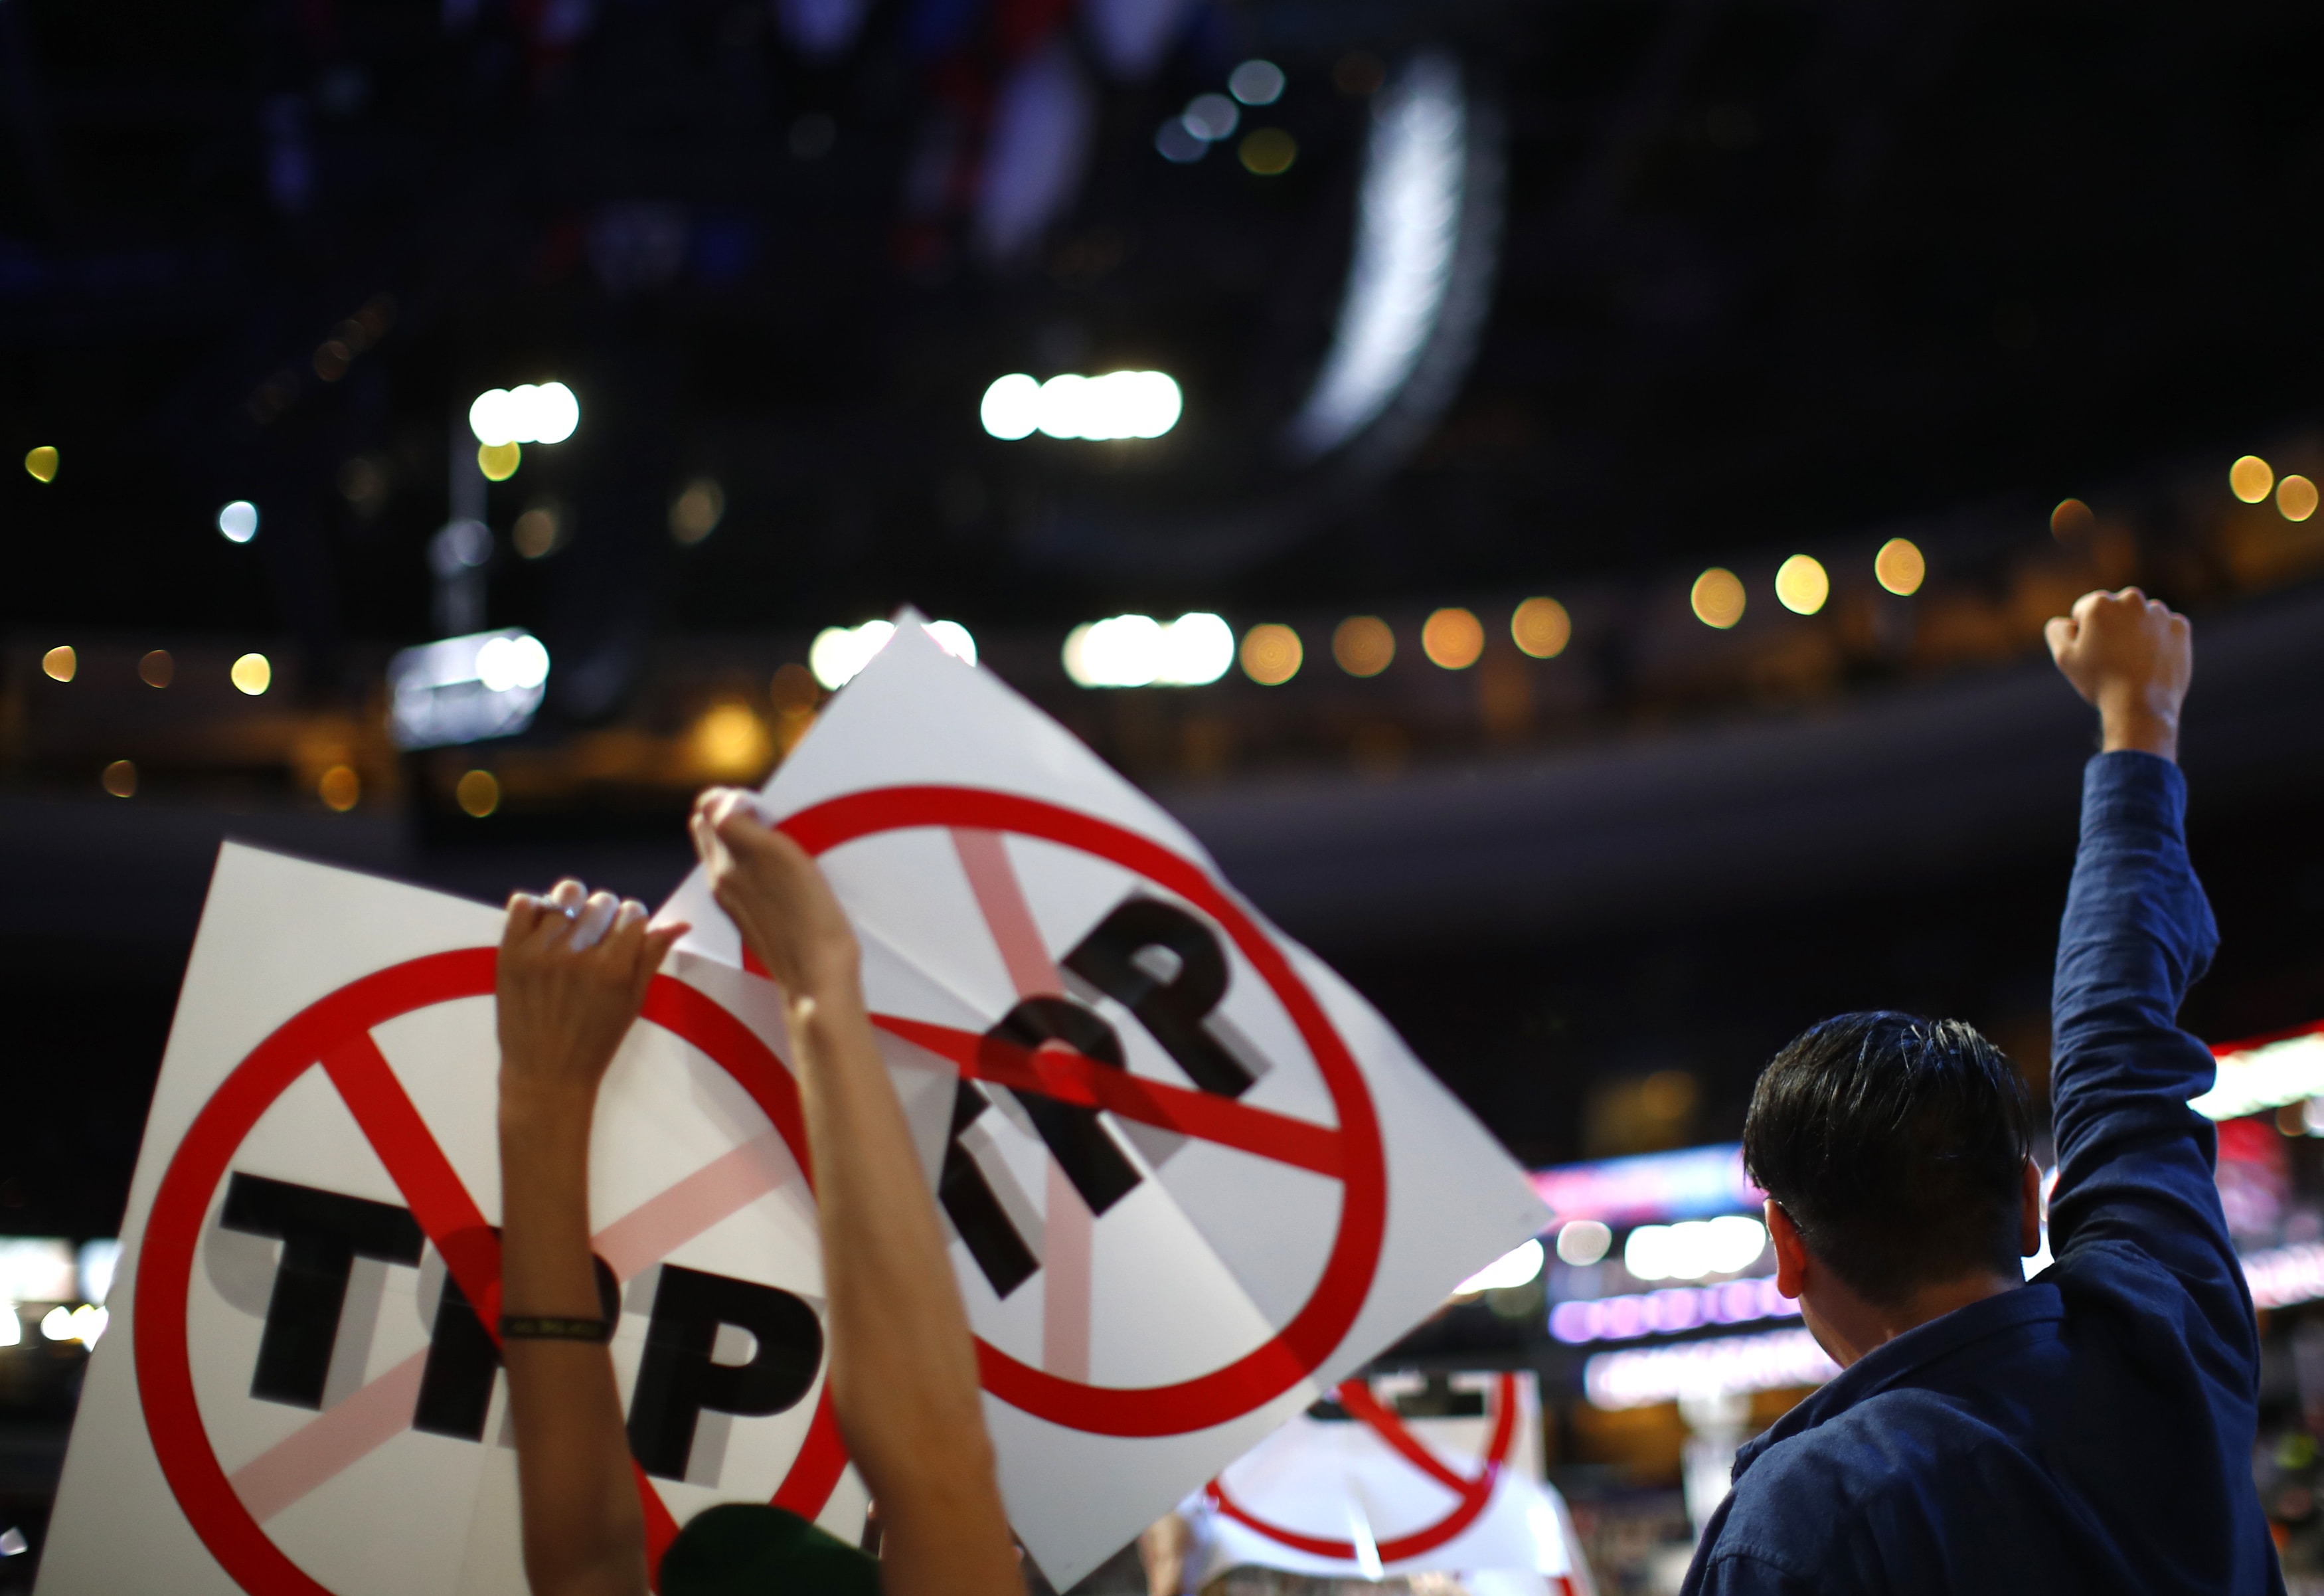 Delegates protesting against the Trans Pacific Partnership trade agreement hold up signs during the first sesssion at the Democratic National Convention in Philadelphia, Pennsylvania, July 2016, REUTERS/Carlos Barria